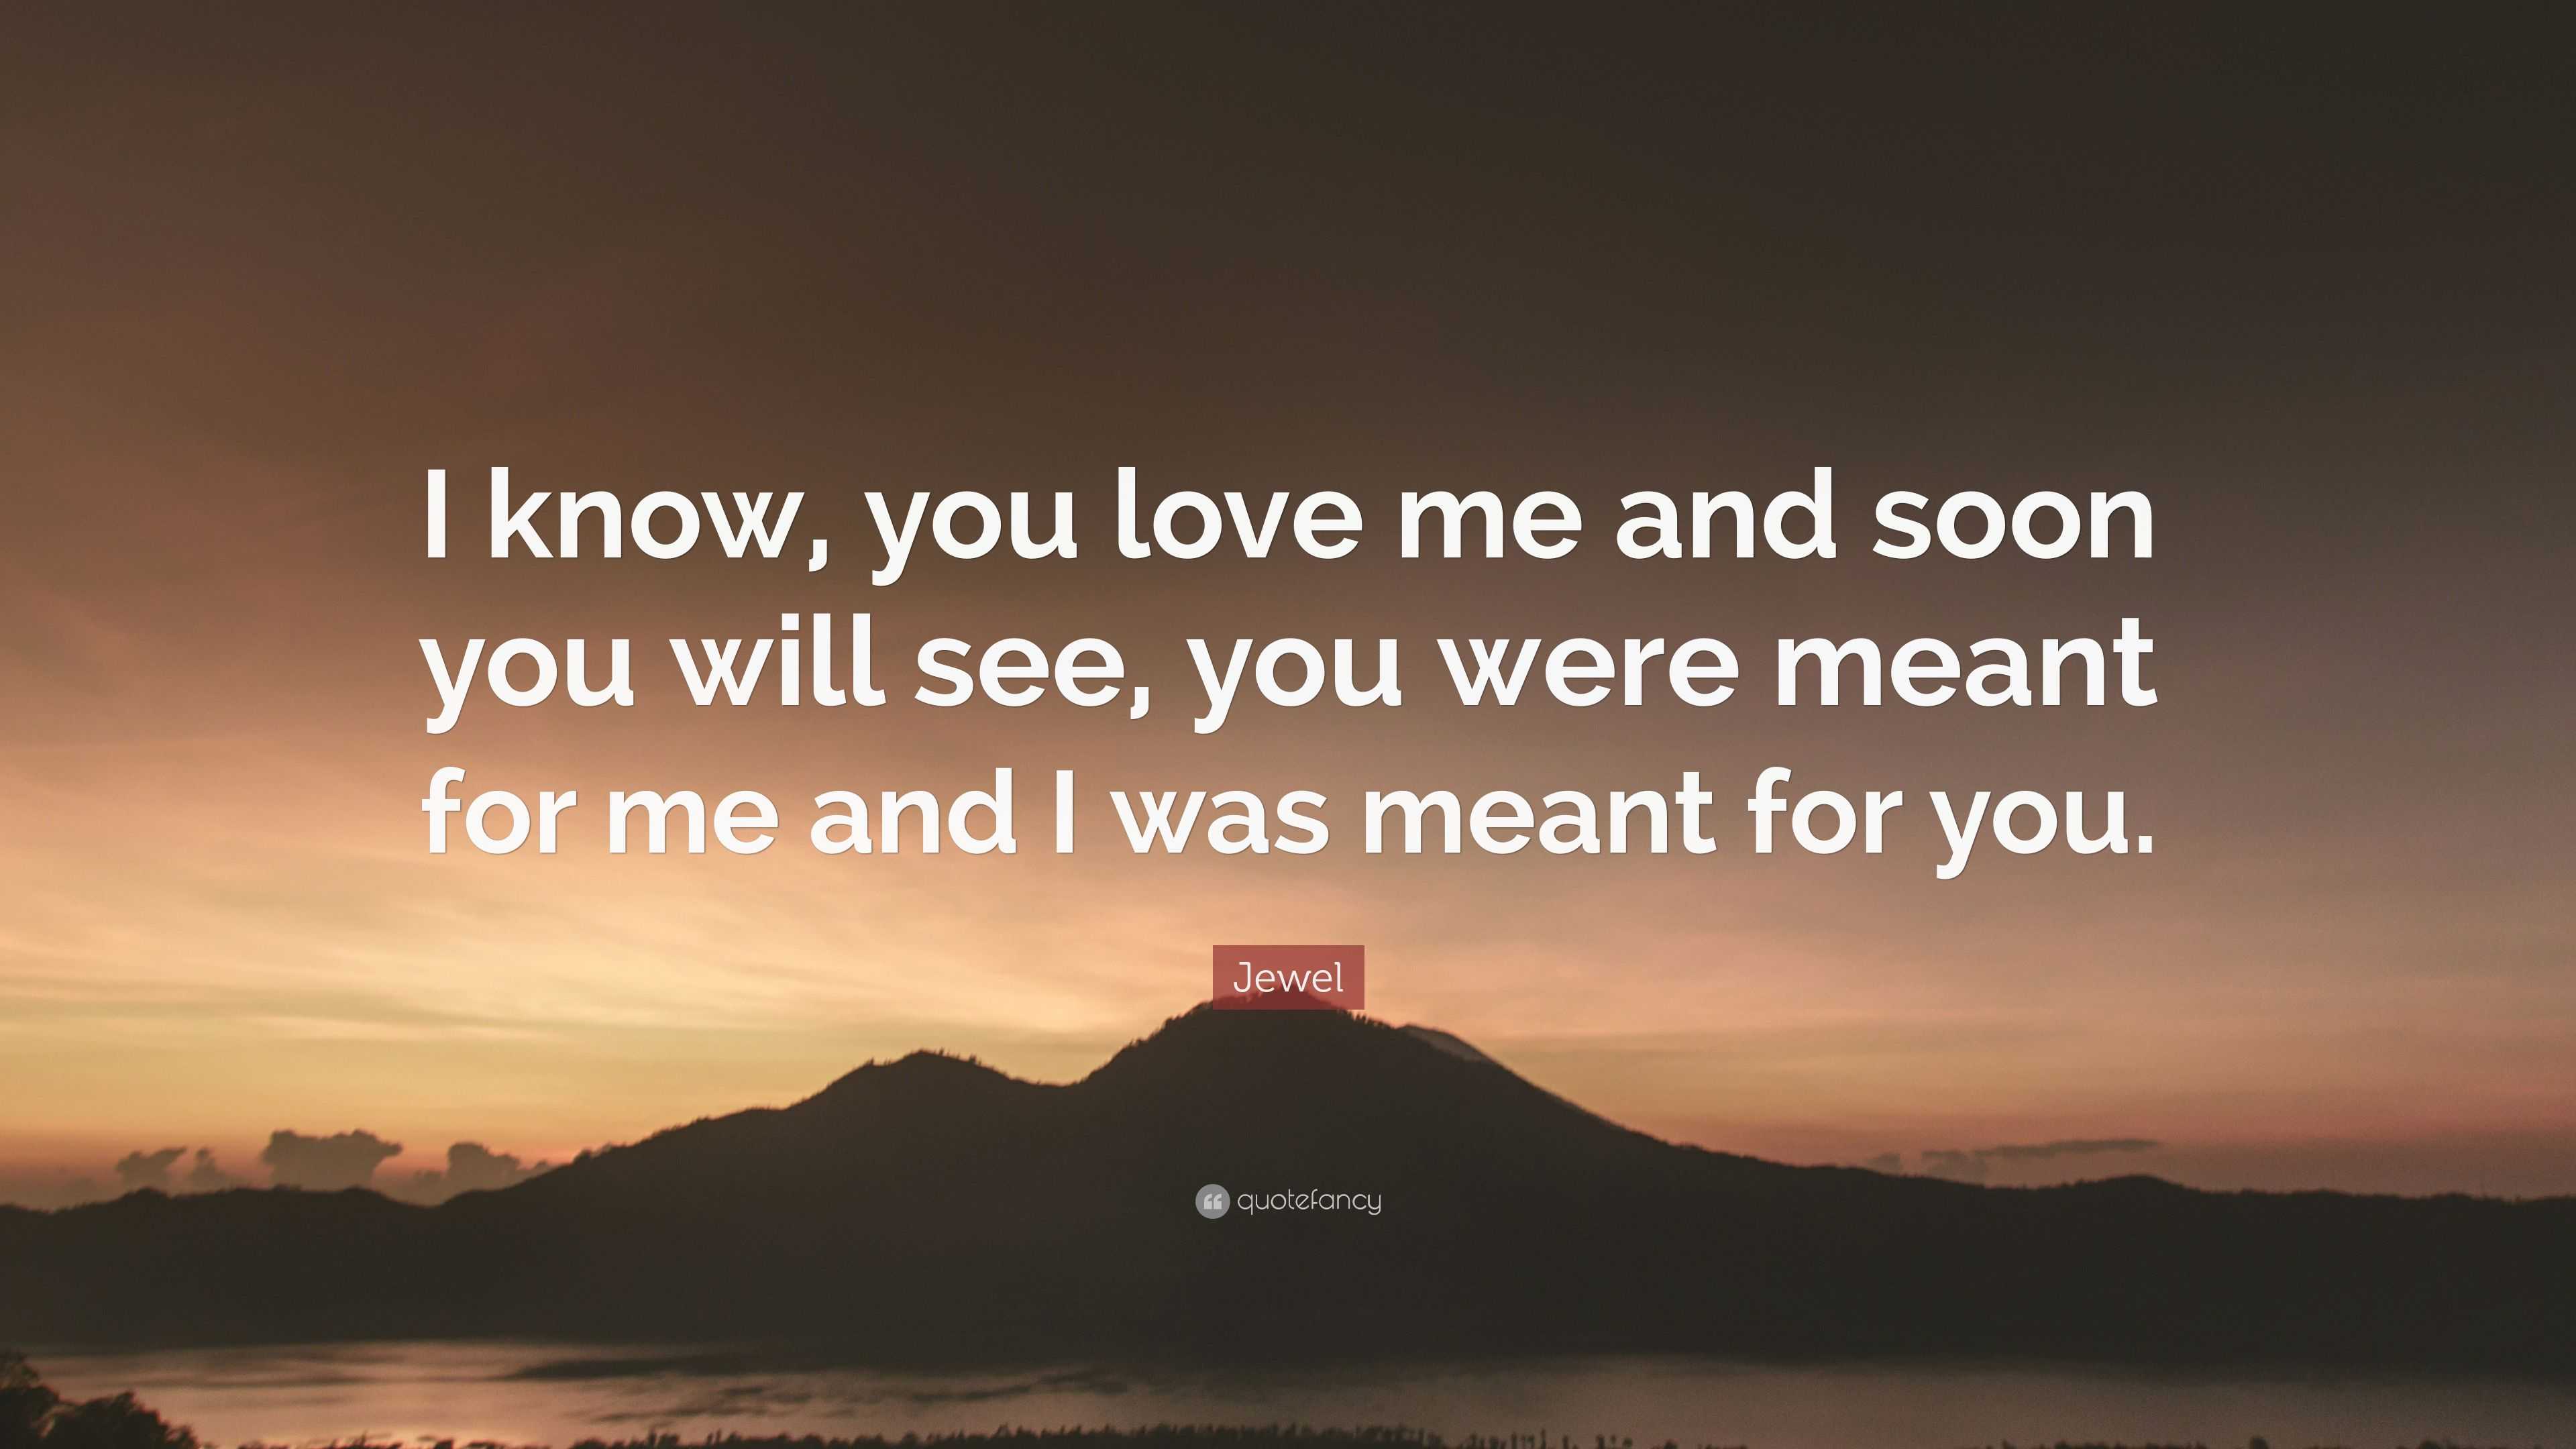 Jewel Quote: "I know, you love me and soon you will see ...